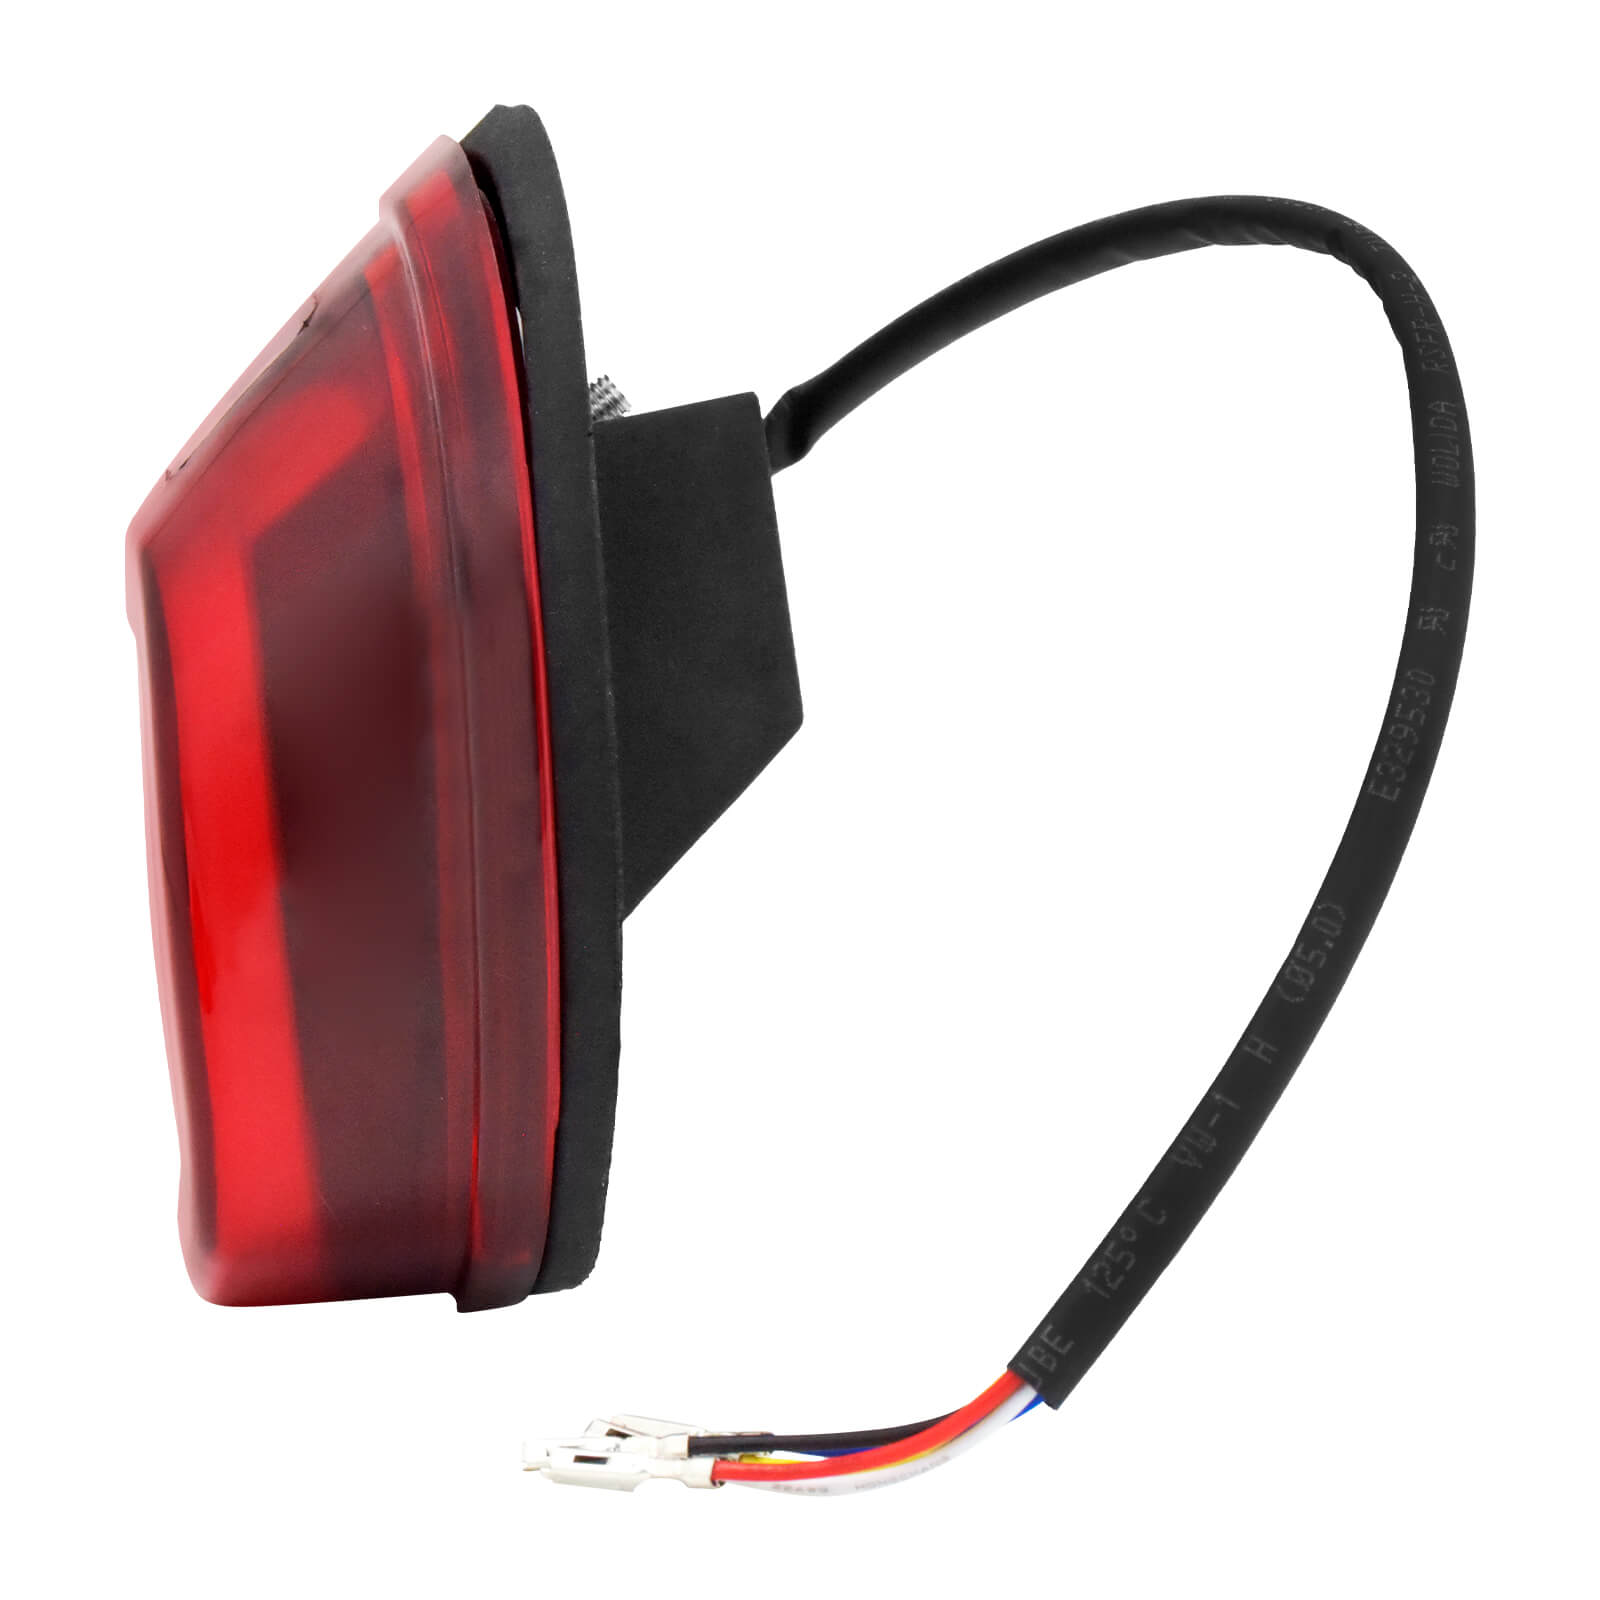 layback-led-tail-light-for-harley-red-housing-LA018604